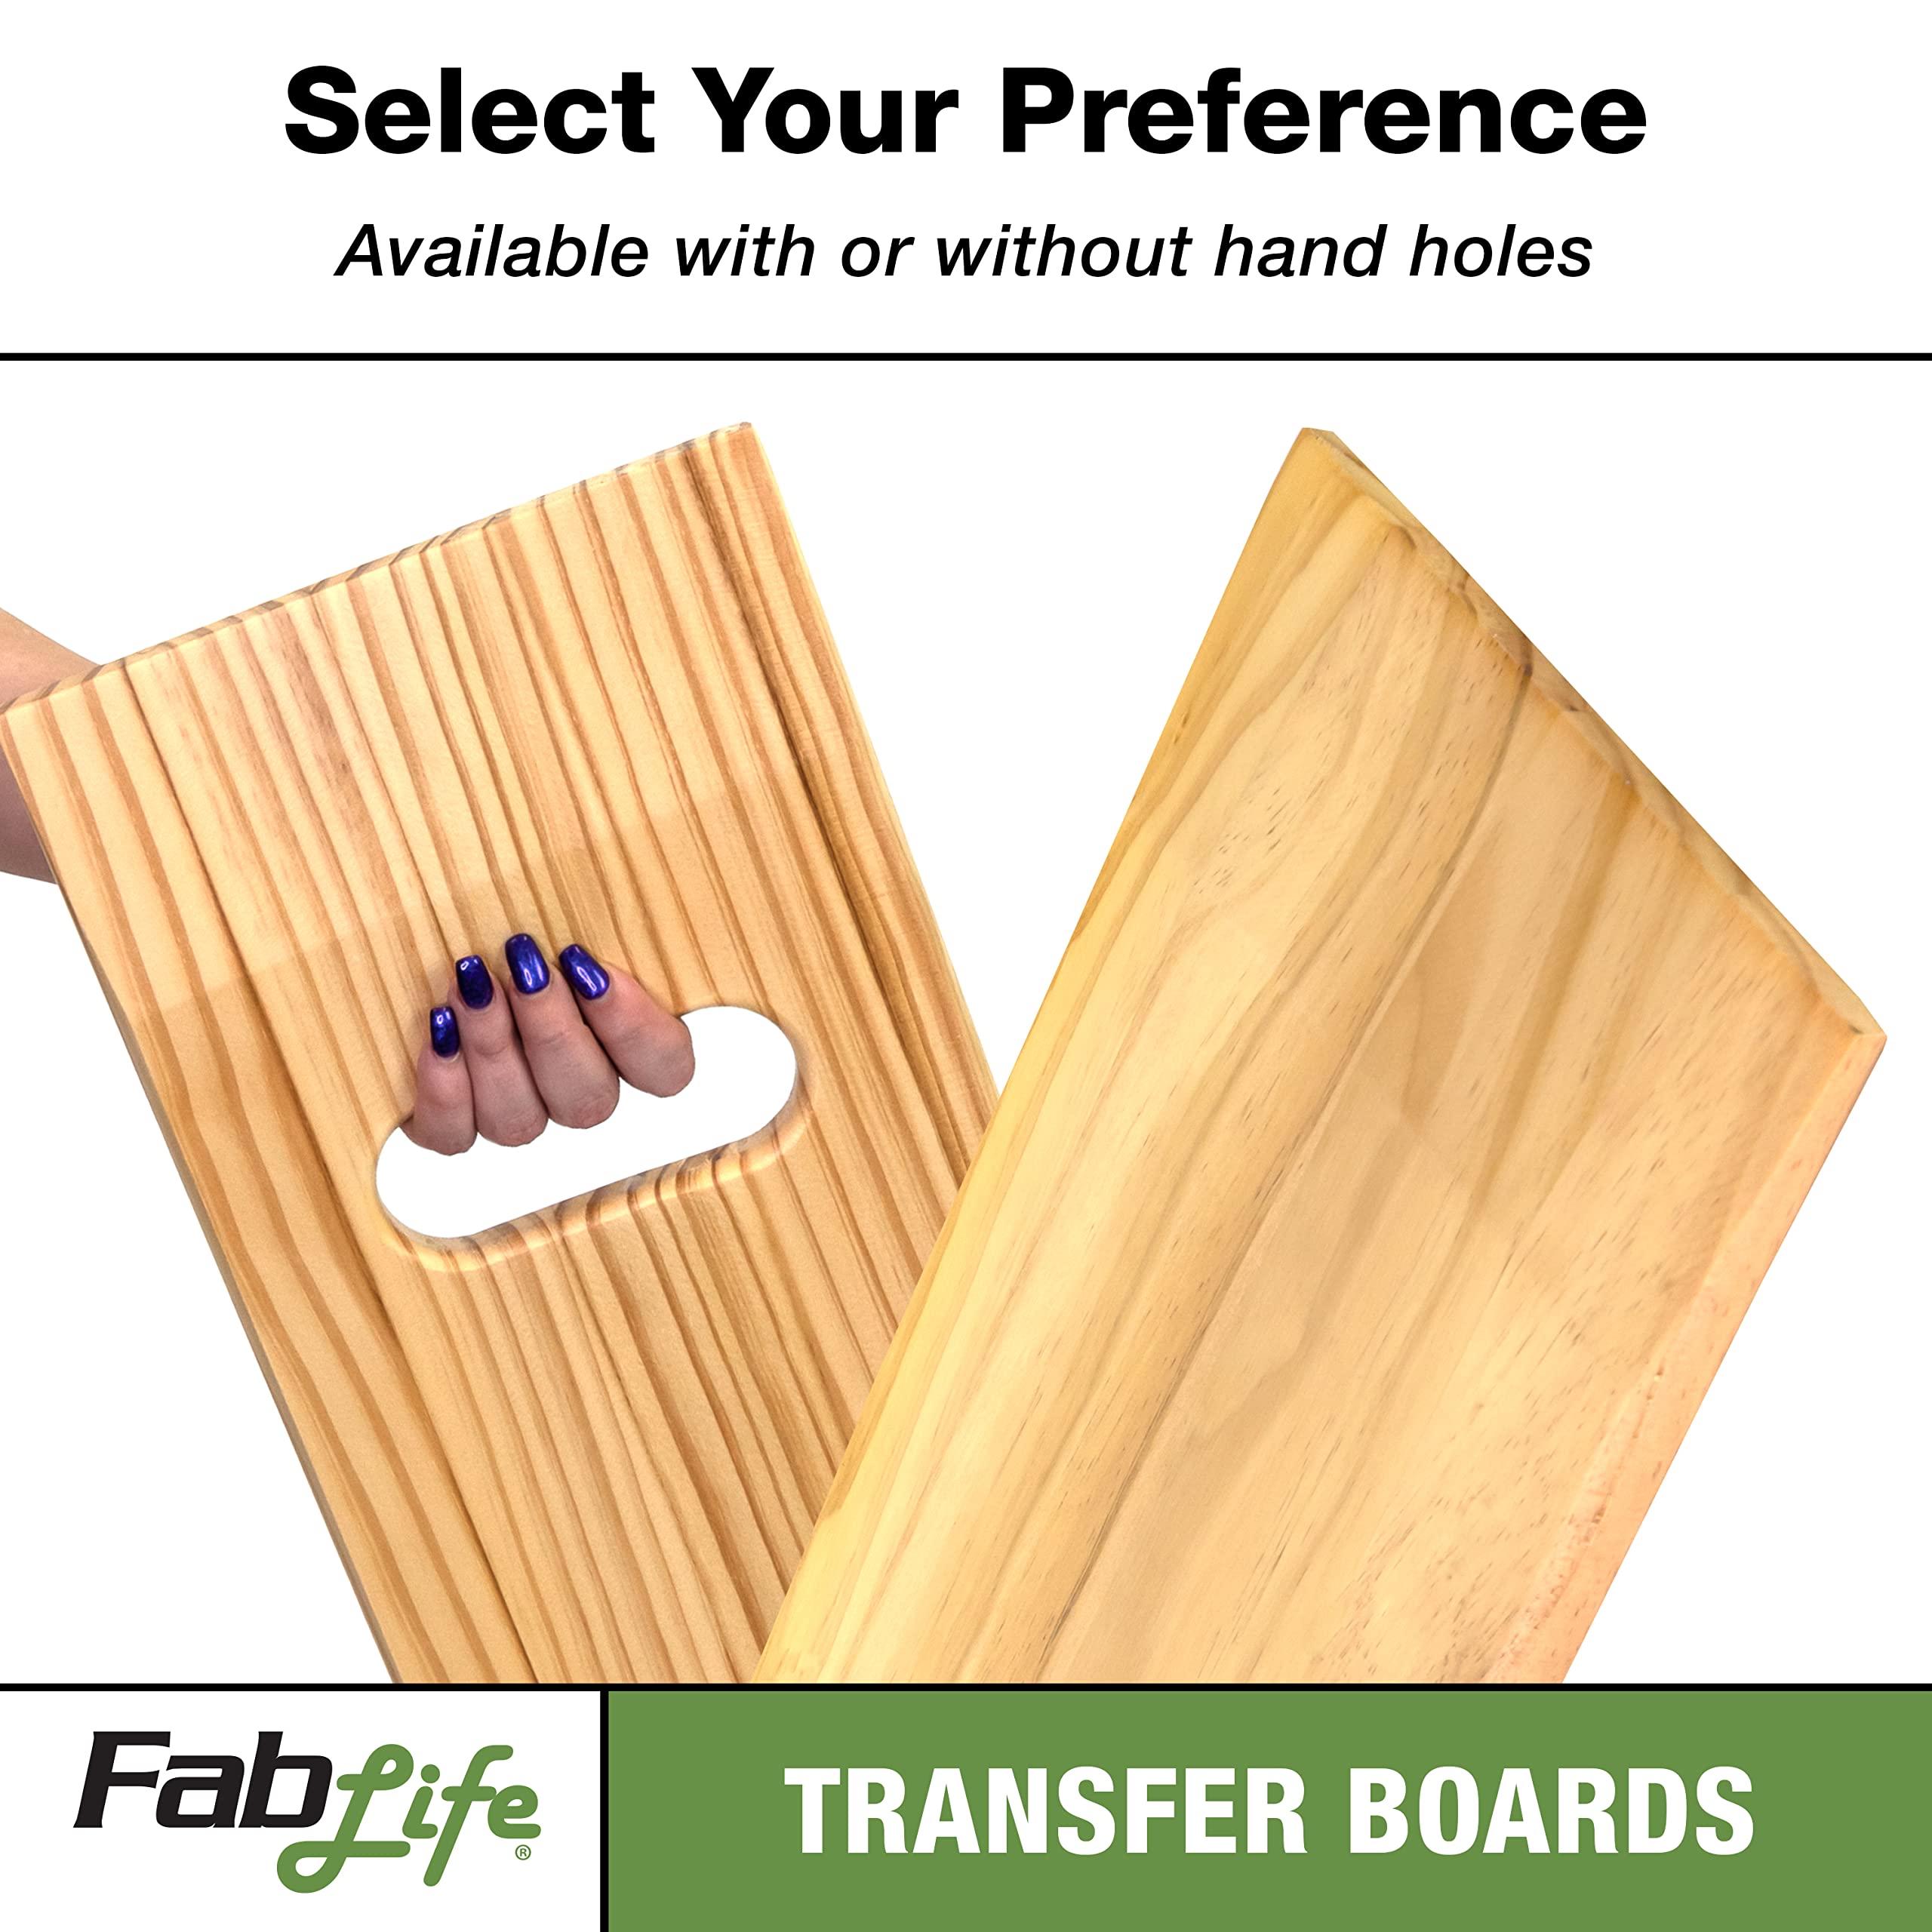 FabLife Deluxe Hardwood Transfer Board for Easy Patient Transfer, Slide Assist Device for Transportation from Wheelchair to Bed, Car, Bath and More, Solid with No Handgrips 8